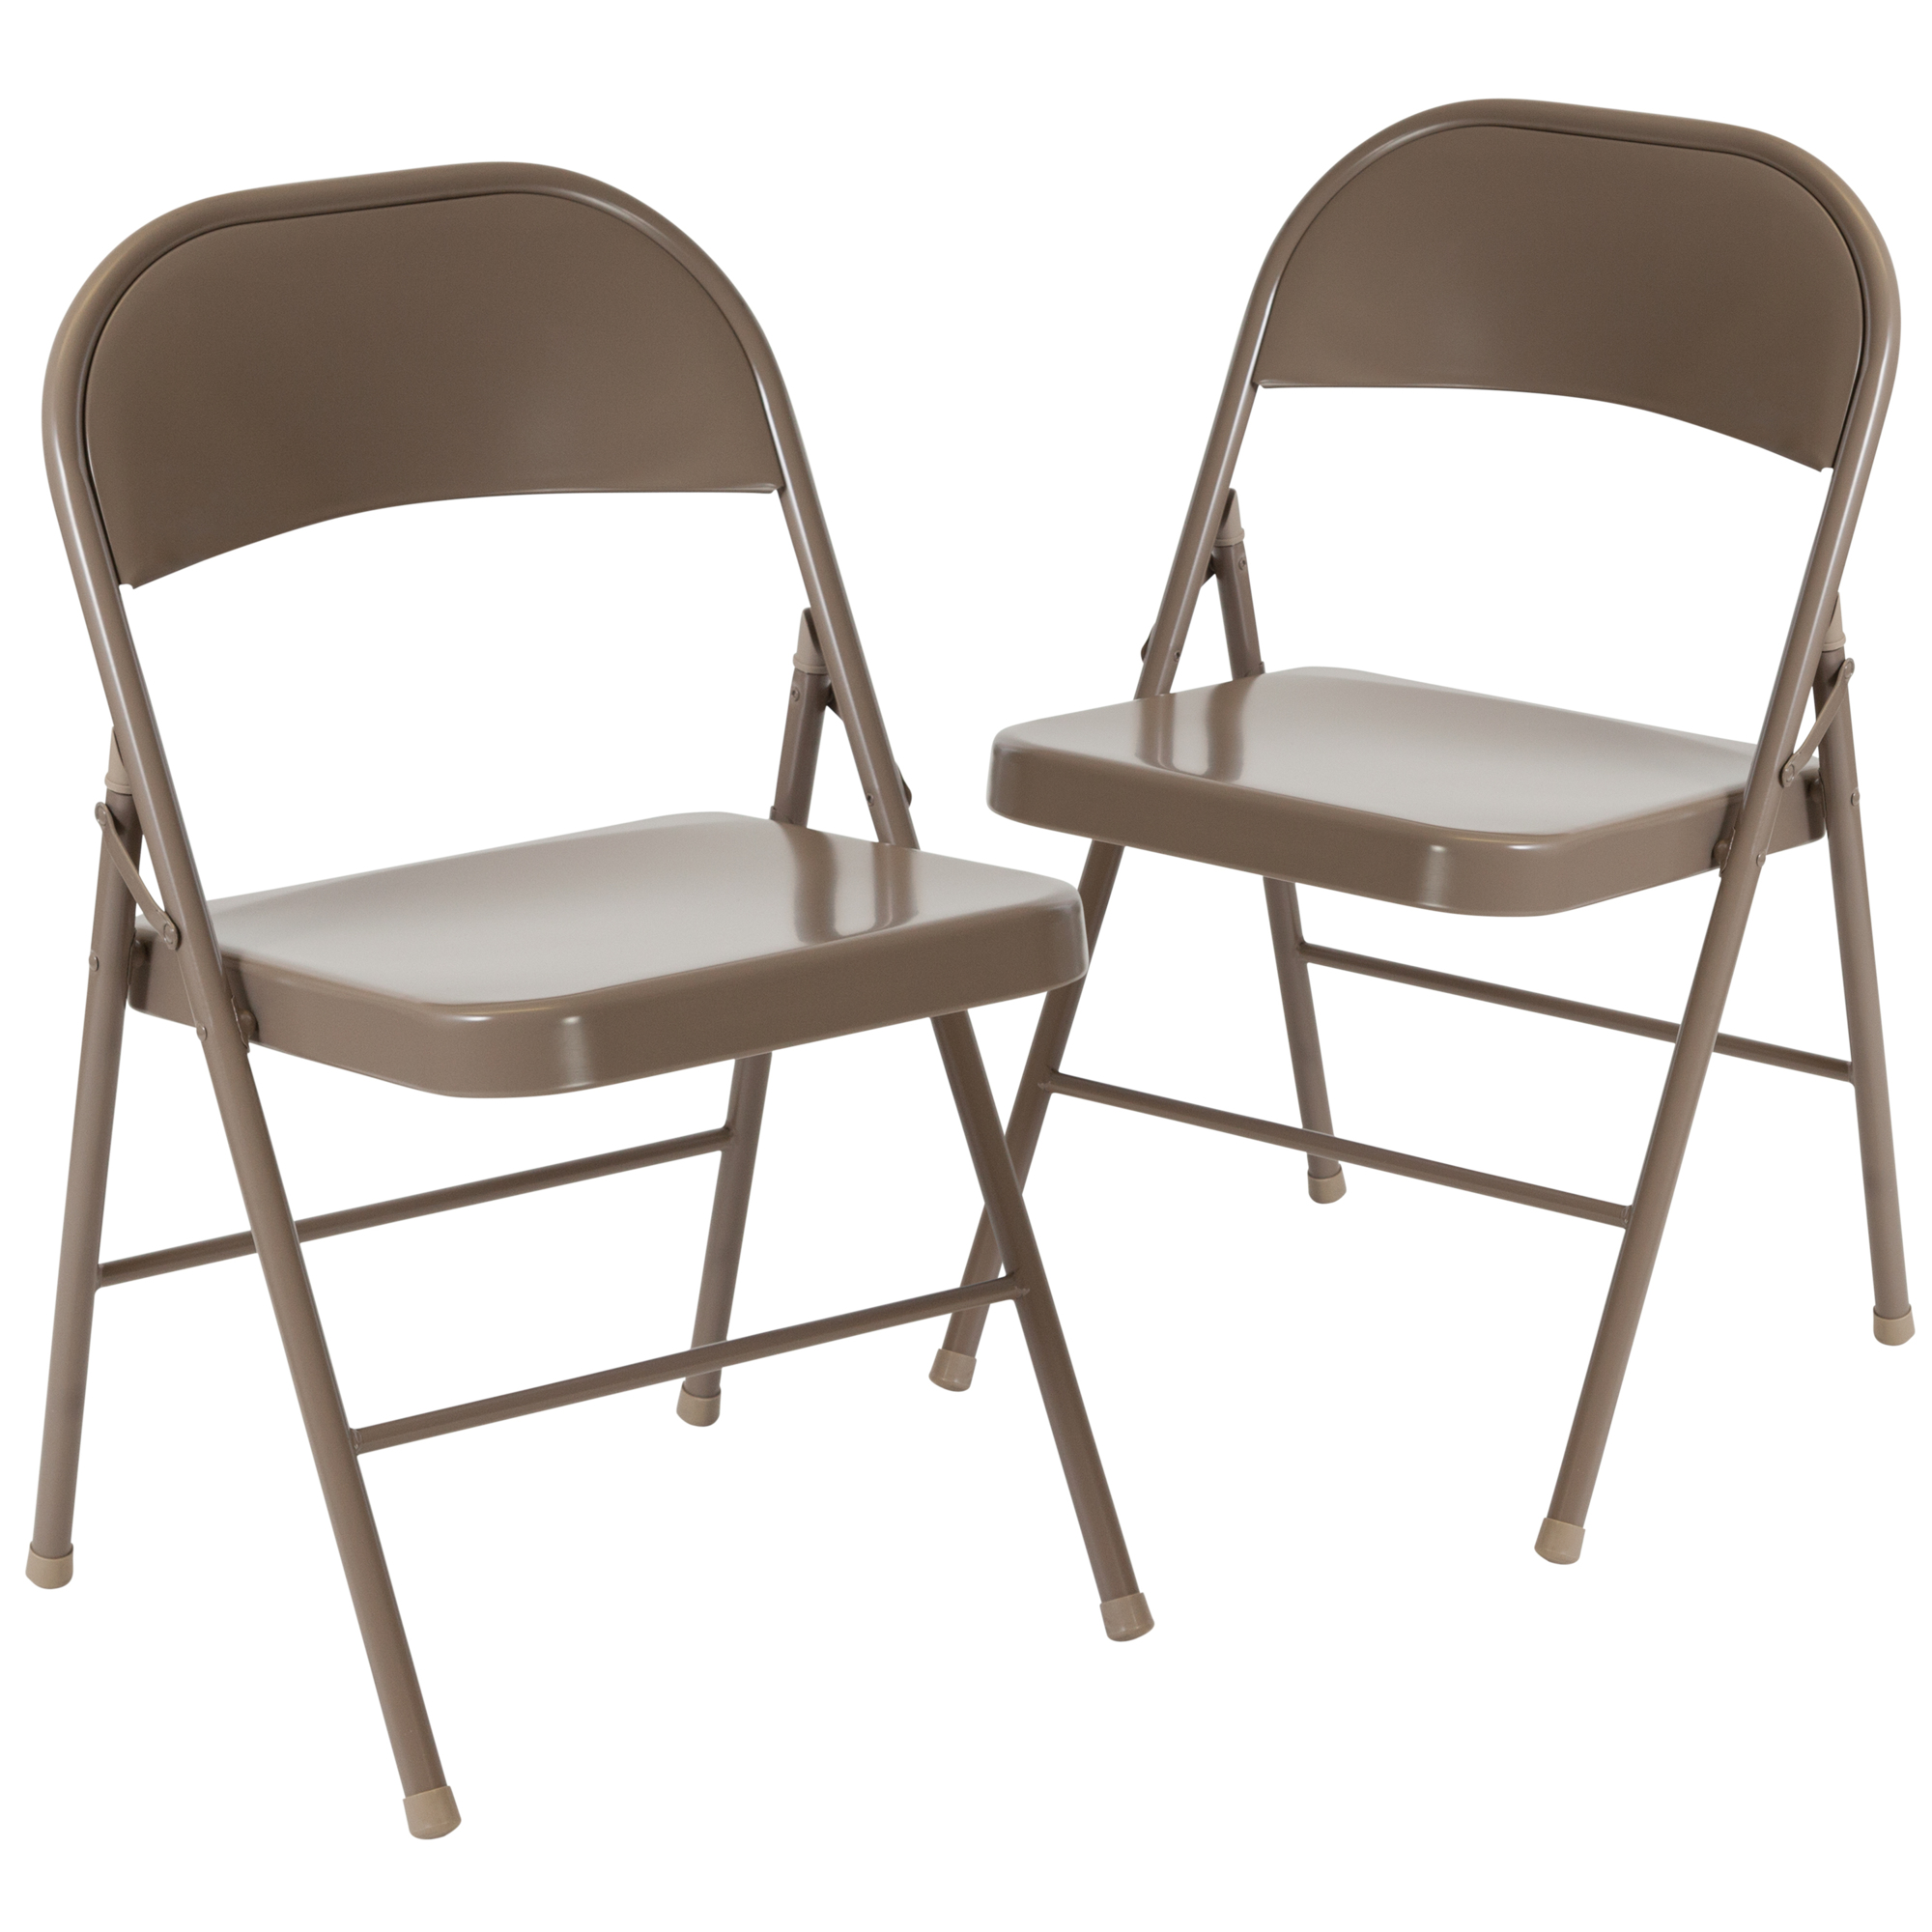 Flash Furniture, 2 Pack Double Braced Beige Metal Folding Chair -, Primary Color Beige, Included (qty.) 2, Model 2BDF002BGE